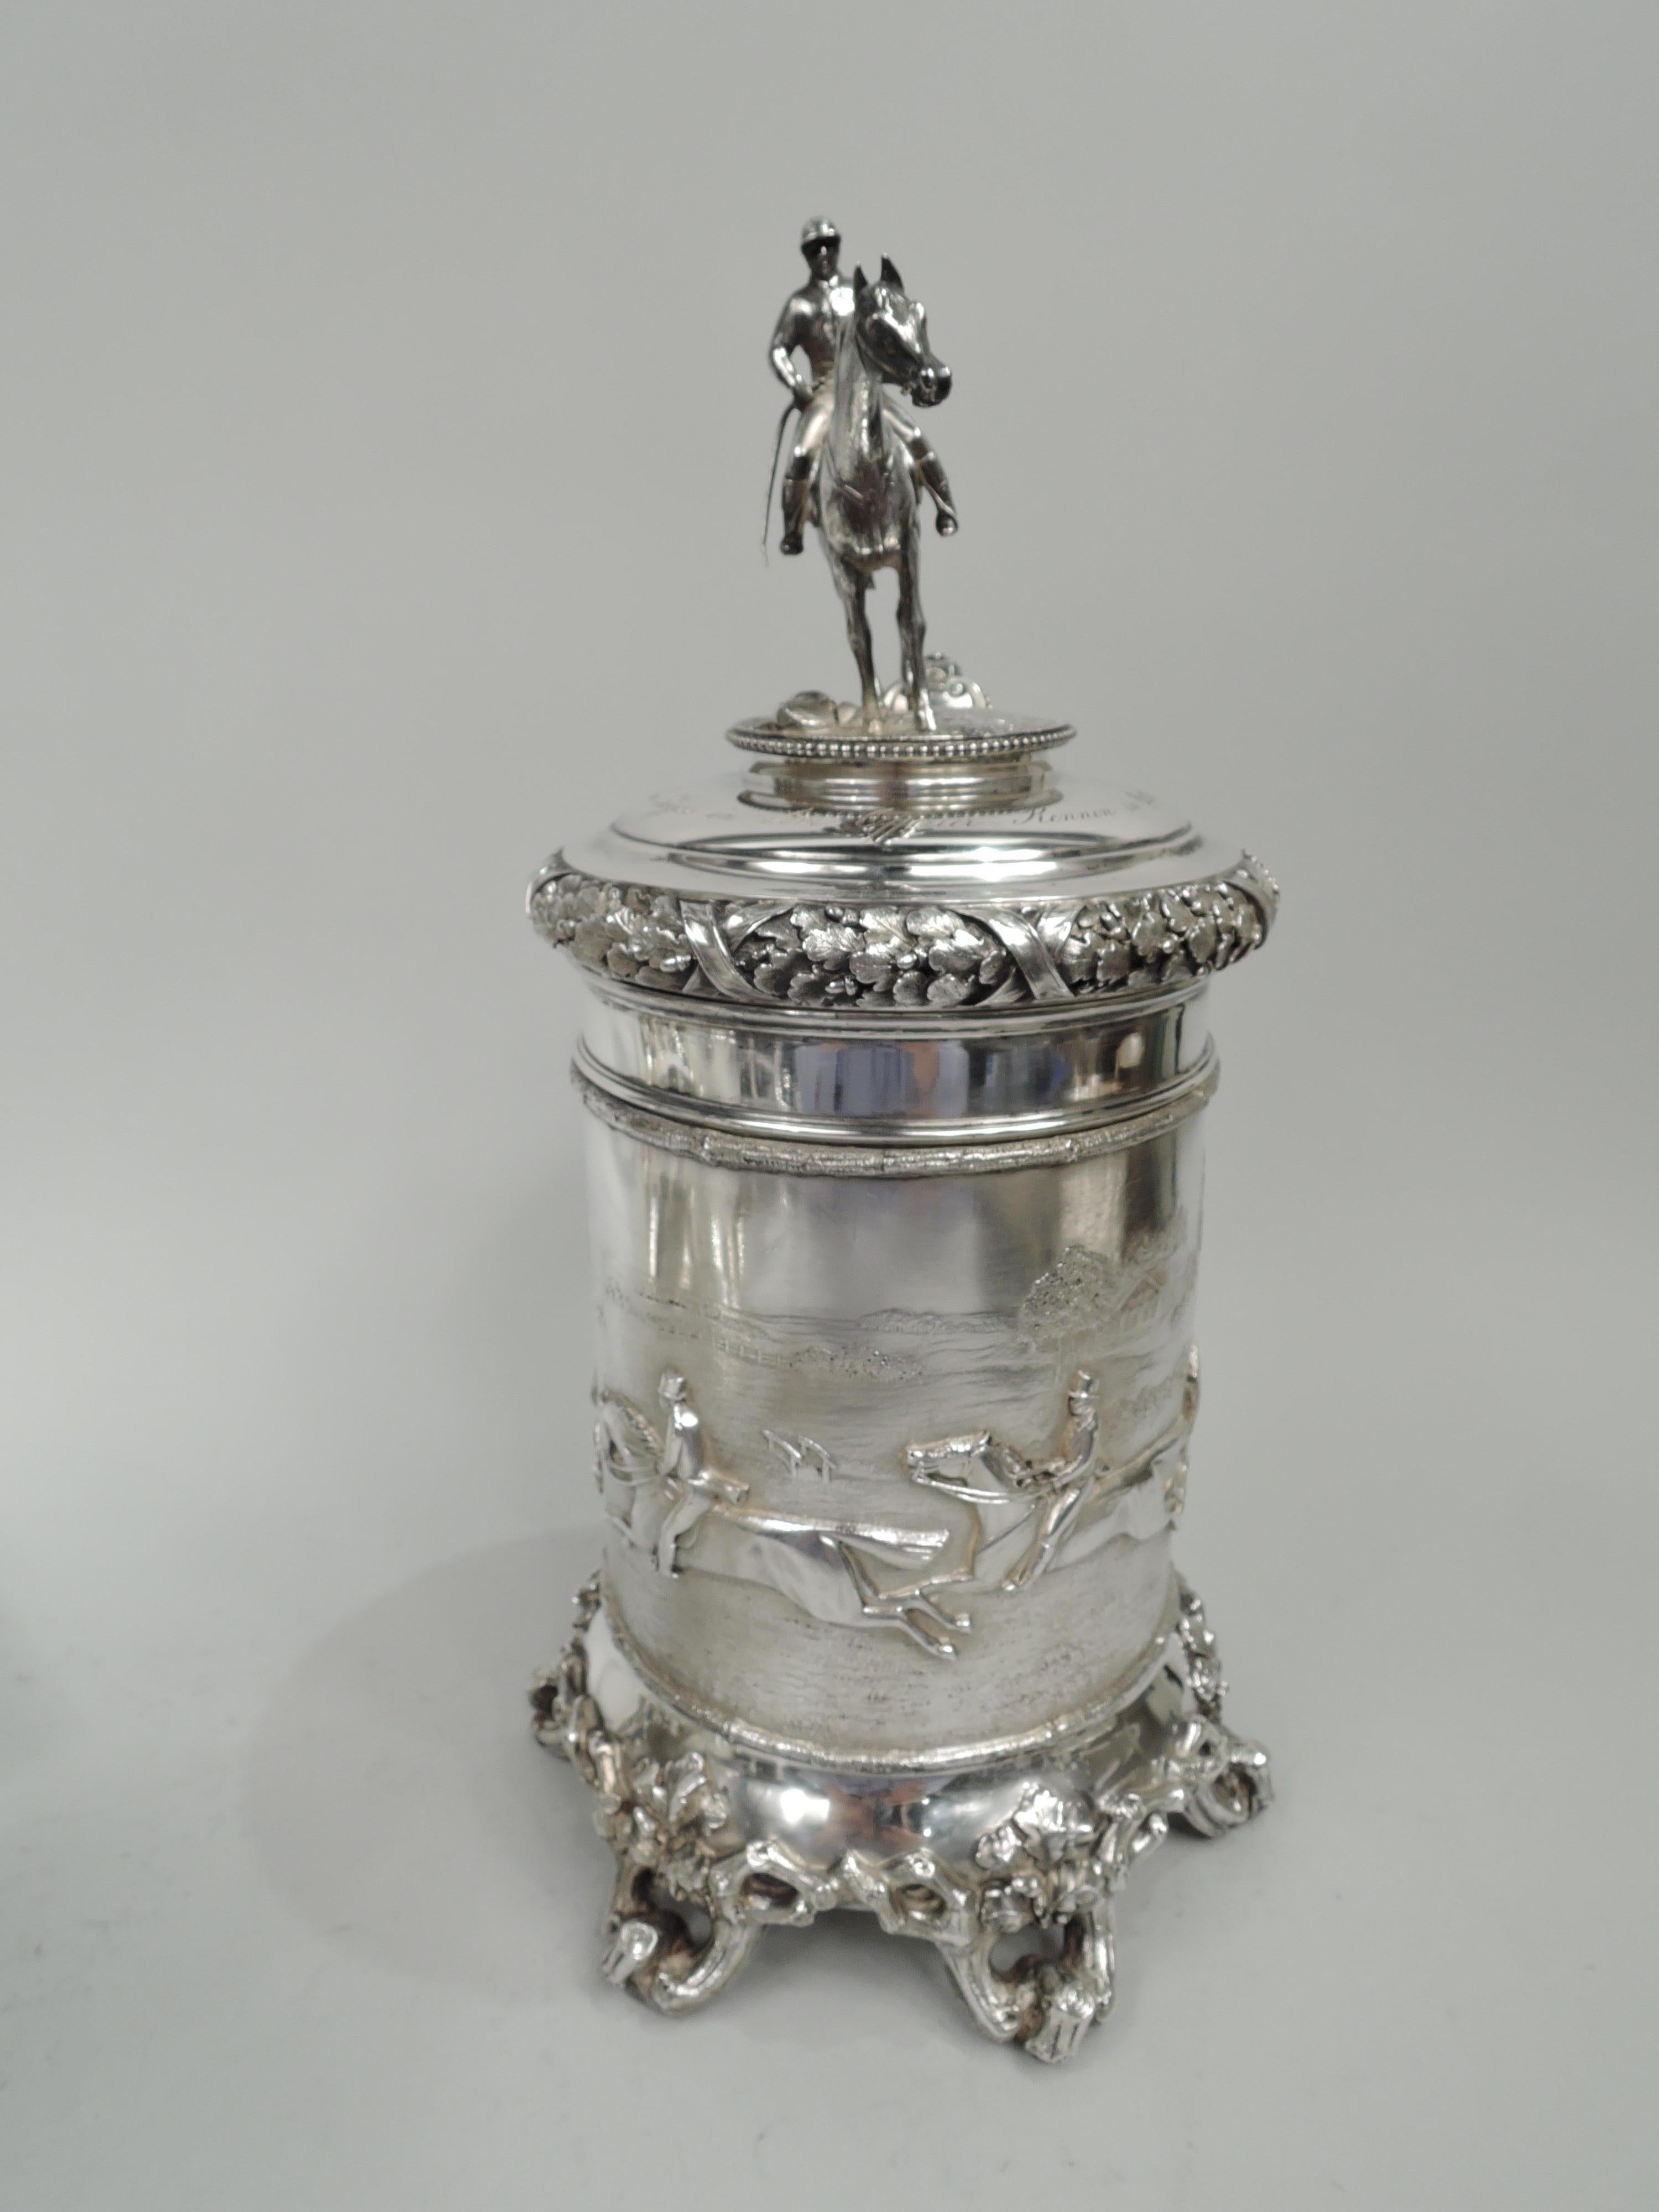 Equestrian-themed silver tankard with German imperial association, ca 1875. Straight and paneled sides with low-relief frieze depicting galloping riders, racing through the countryside, trees and buildings in the background; branch borders.